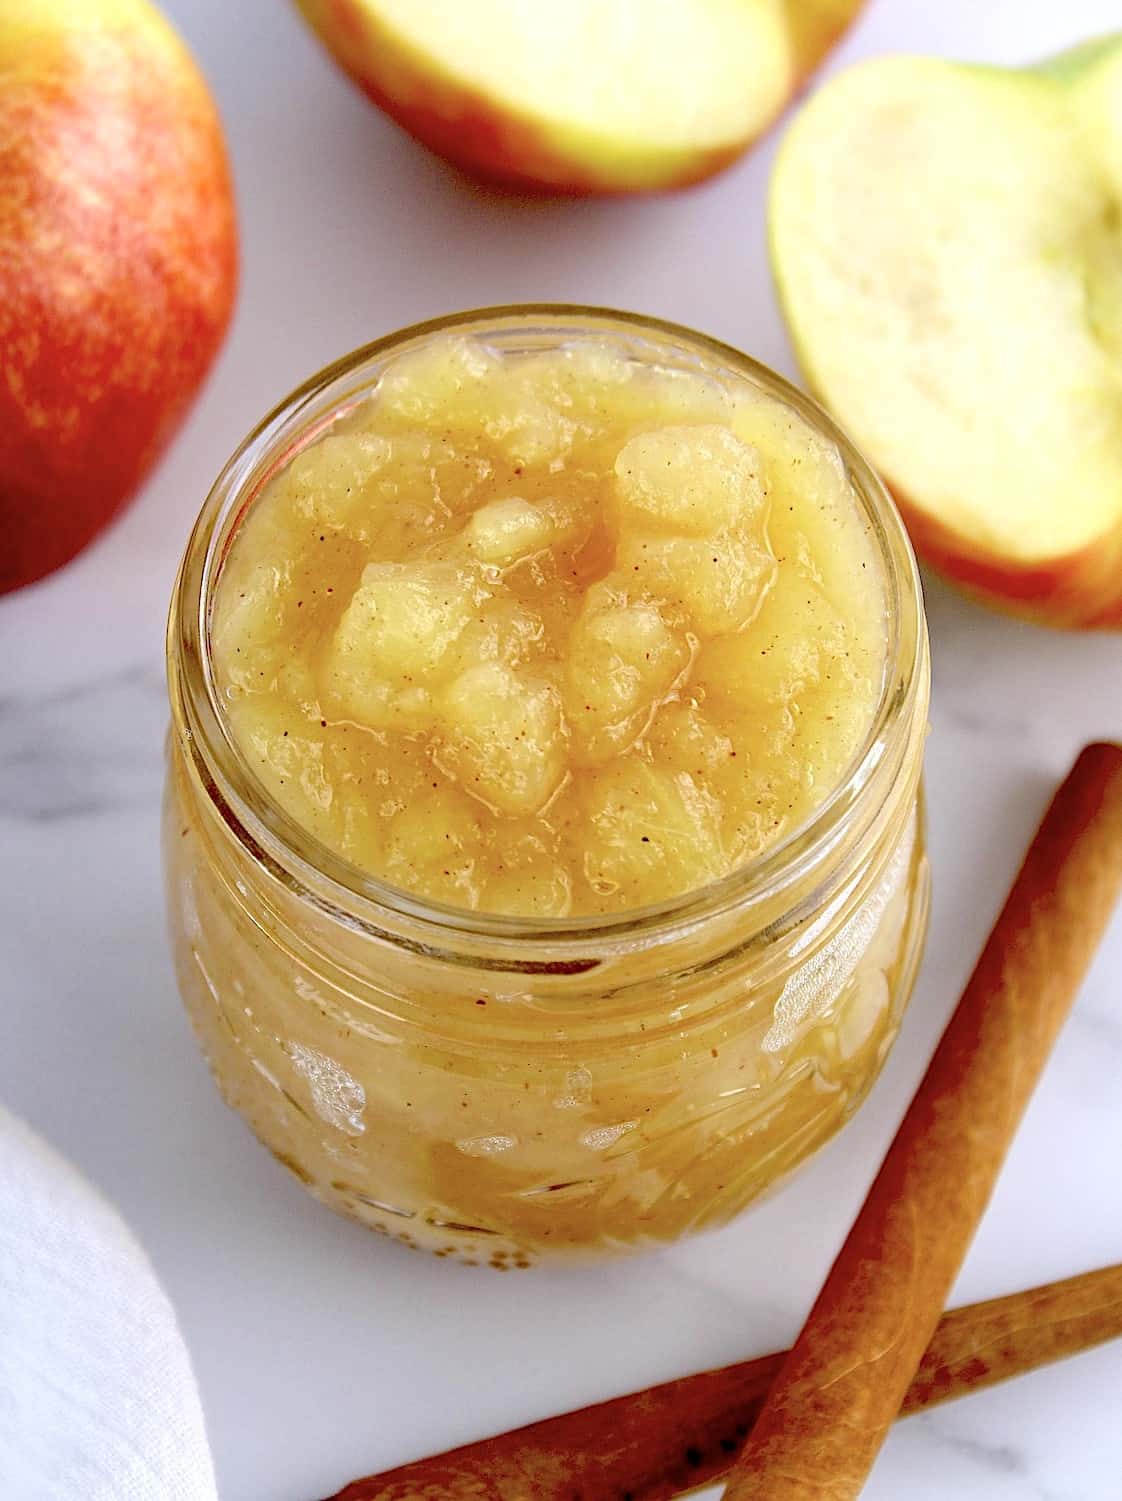 Homemade Applesauce in open glass jar with fresh apples in background with 2 cinnamon sticks